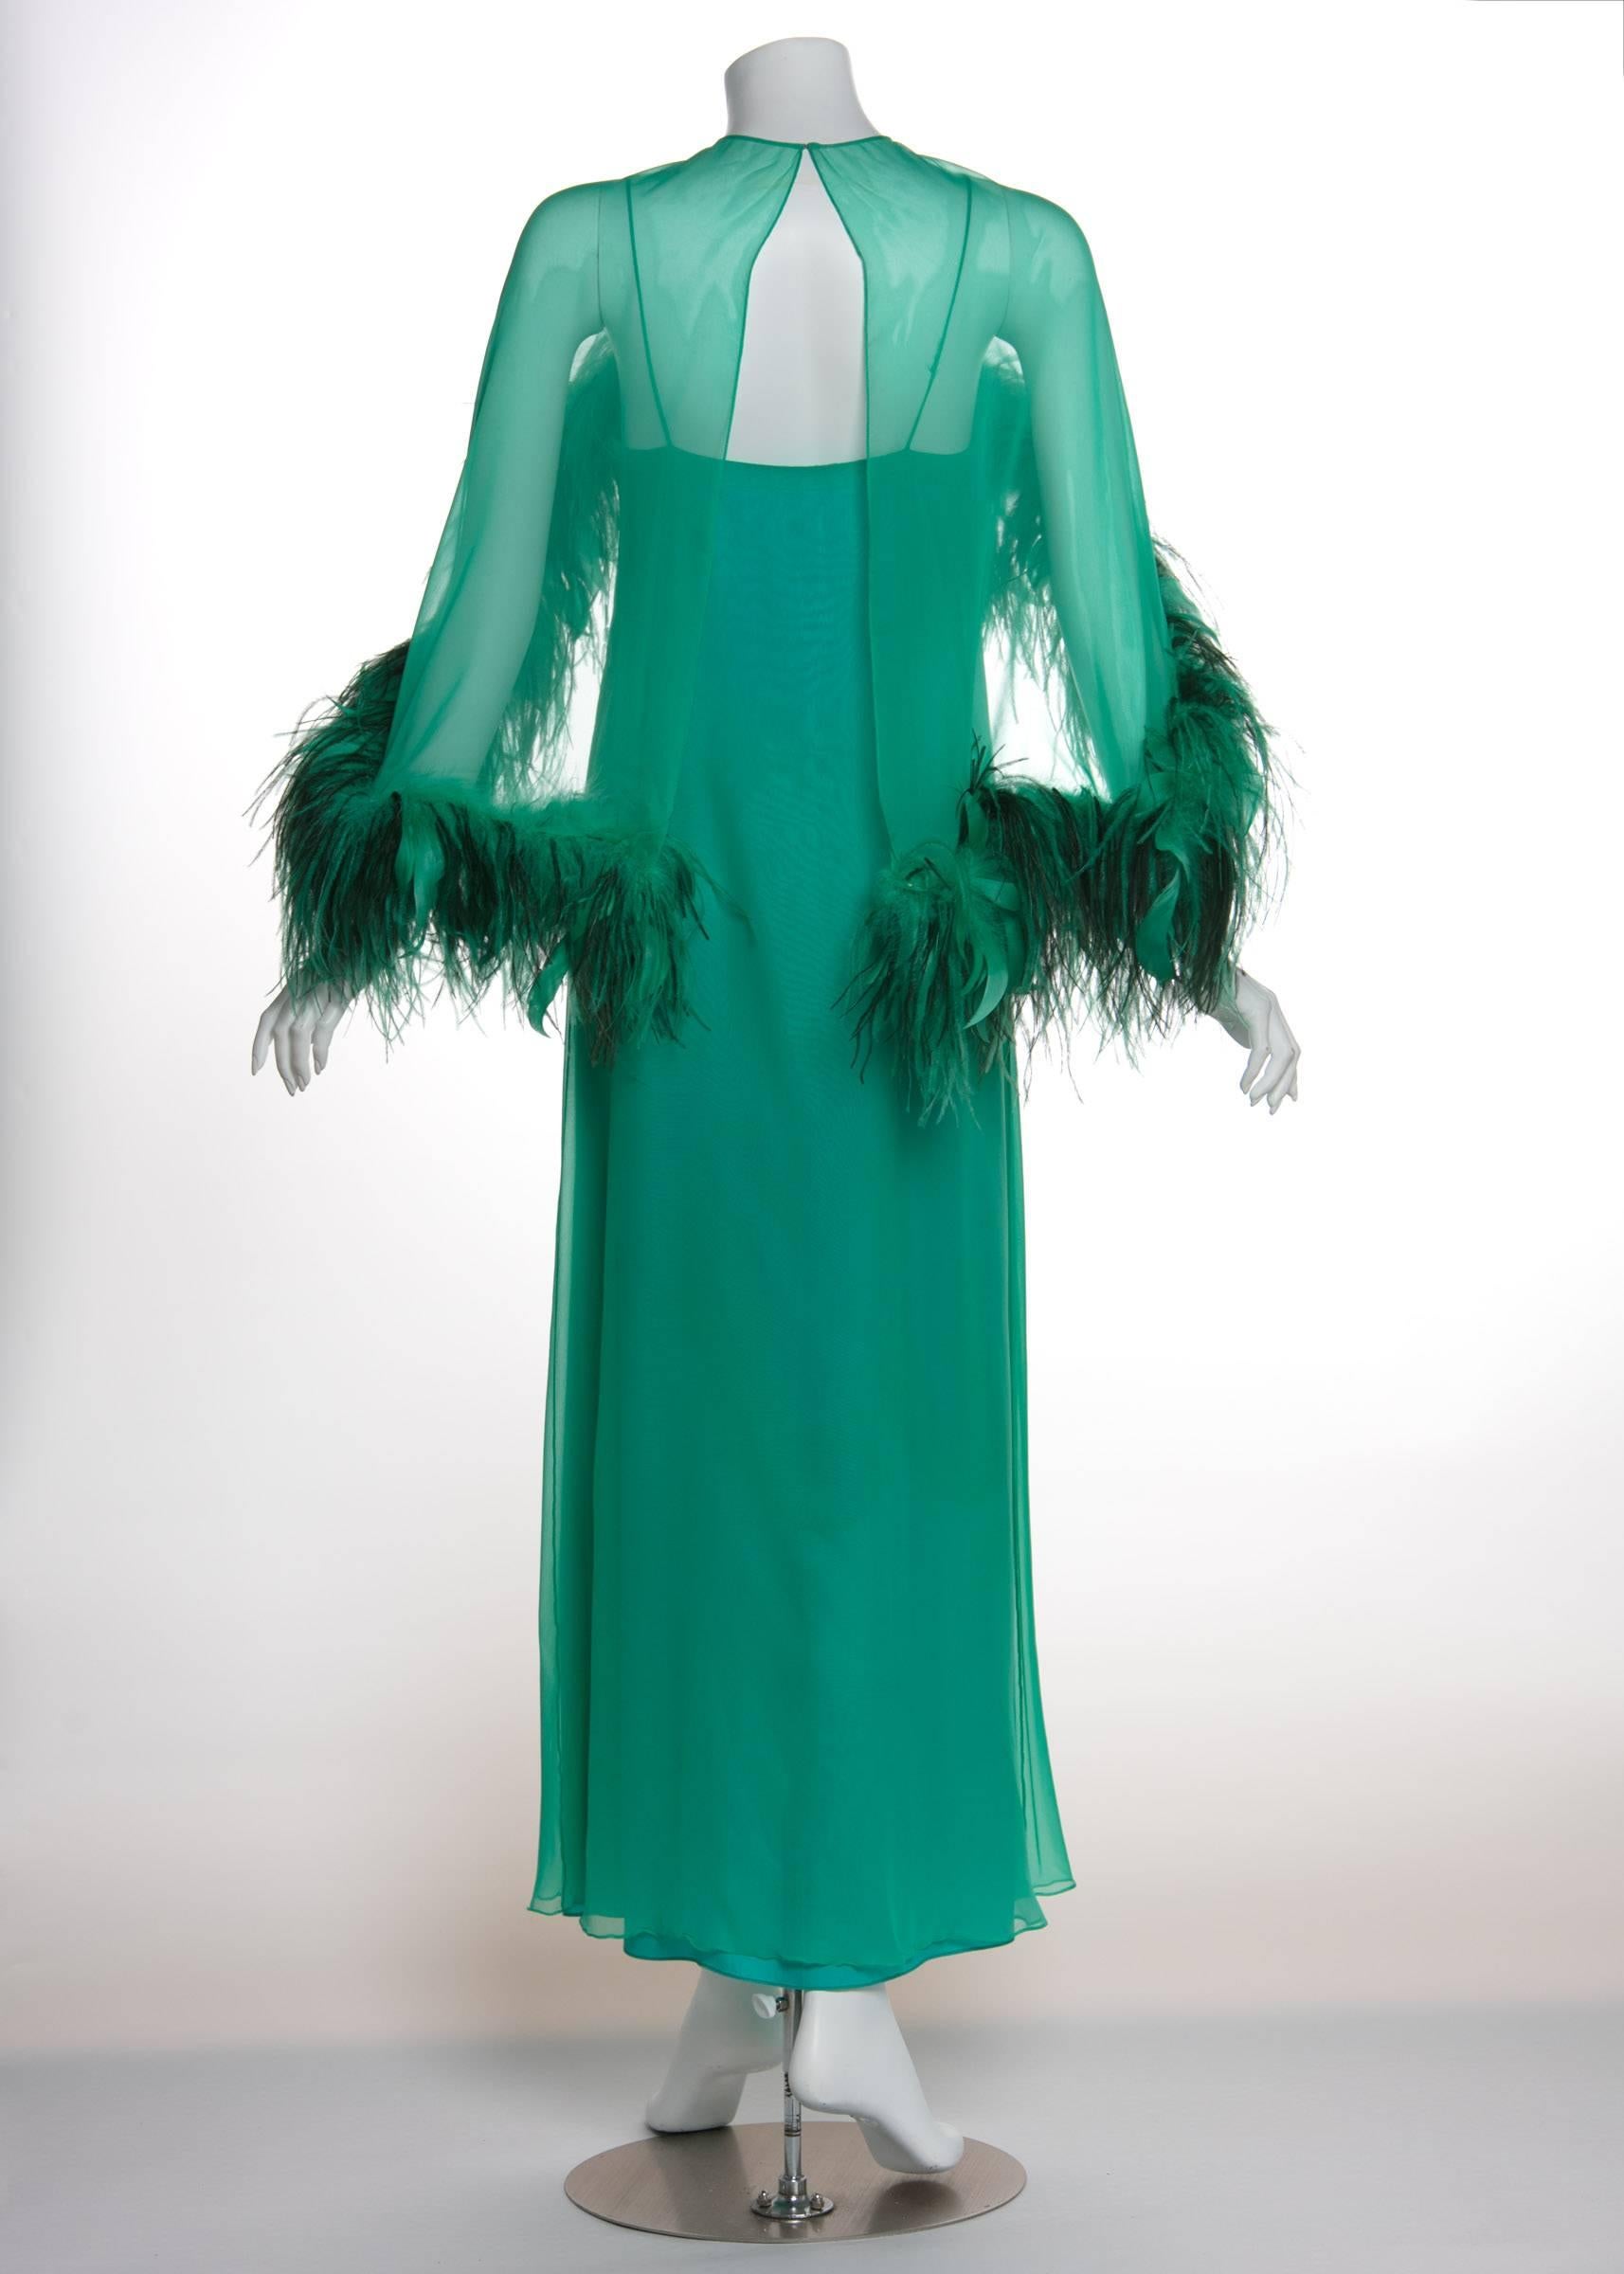 1970s Malcolm Starr Emerald Green Chiffon Gown & Ostrich Feather Cape Set 3